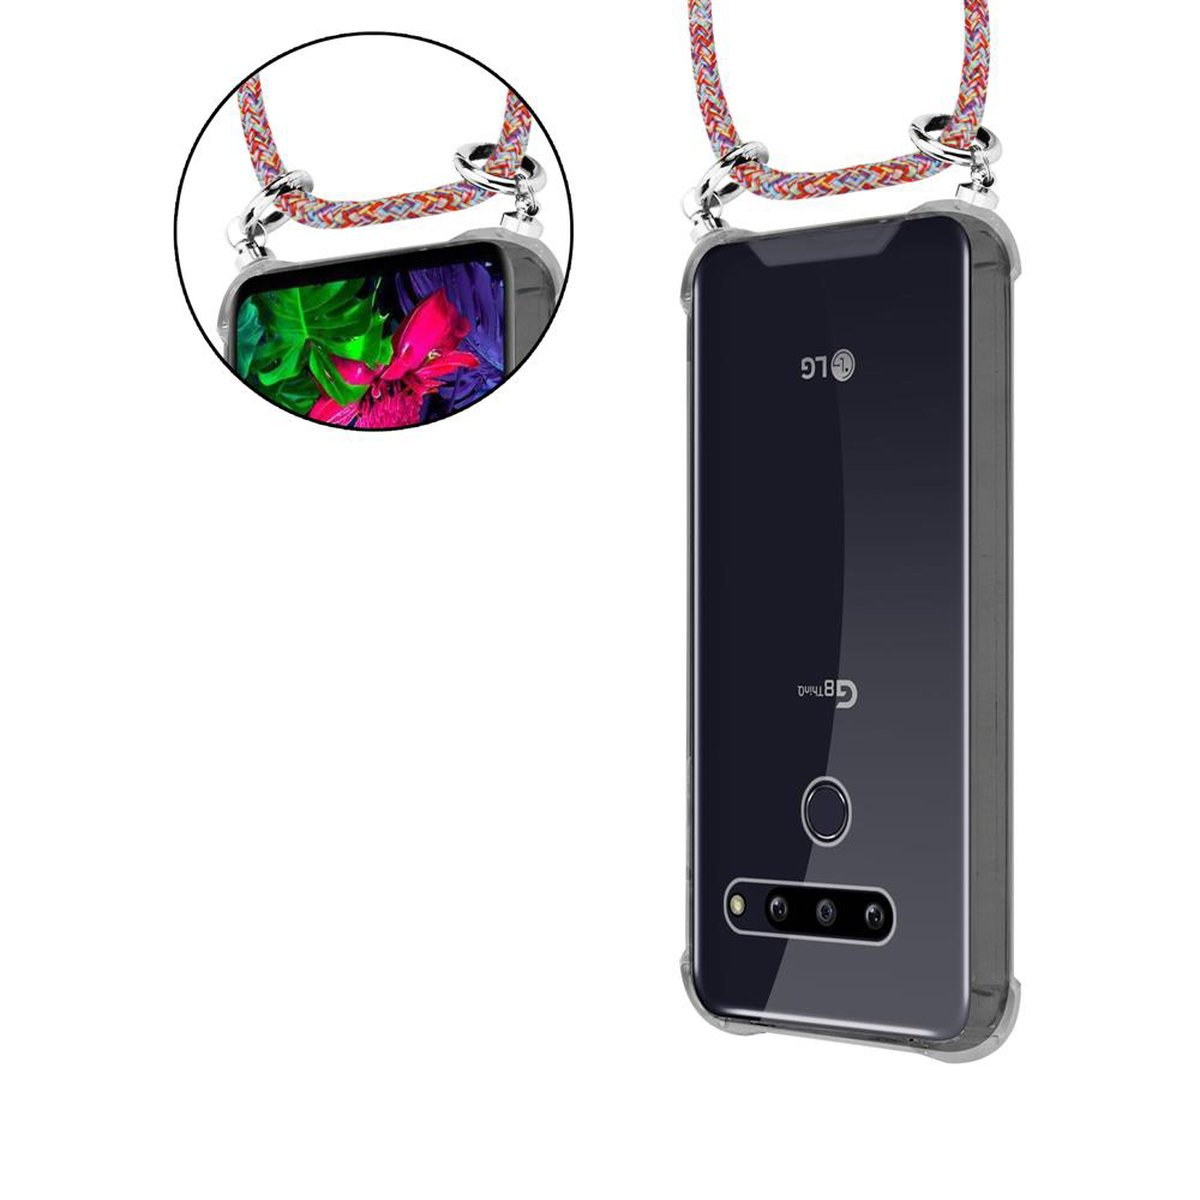 Kette Silber ThinQ, Hülle, Handy Backcover, Ringen, und G8 mit abnehmbarer PARROT Band COLORFUL CADORABO Kordel LG,